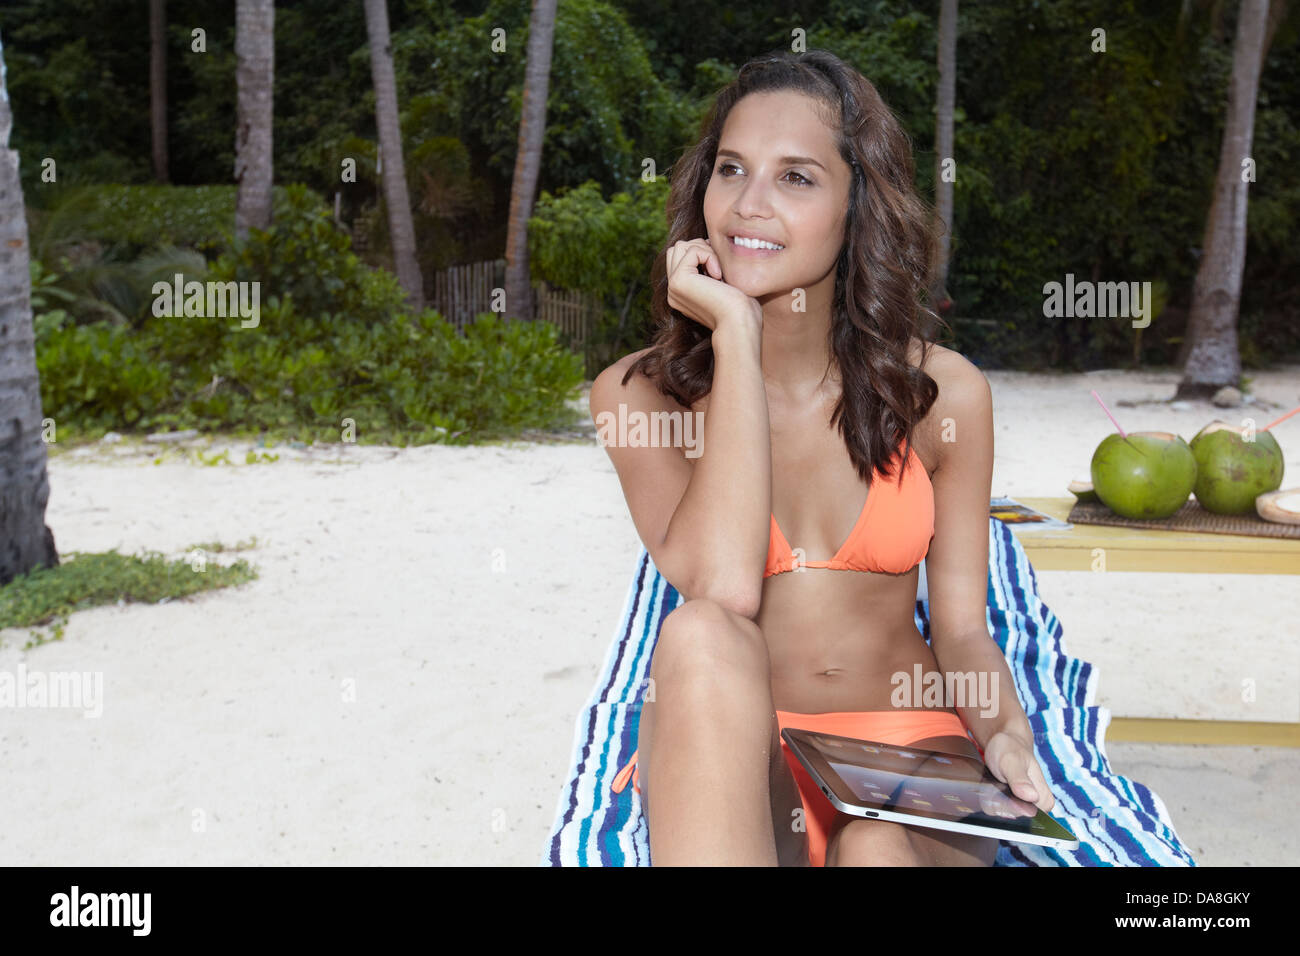 A woman relaxing on a beach. Stock Photo